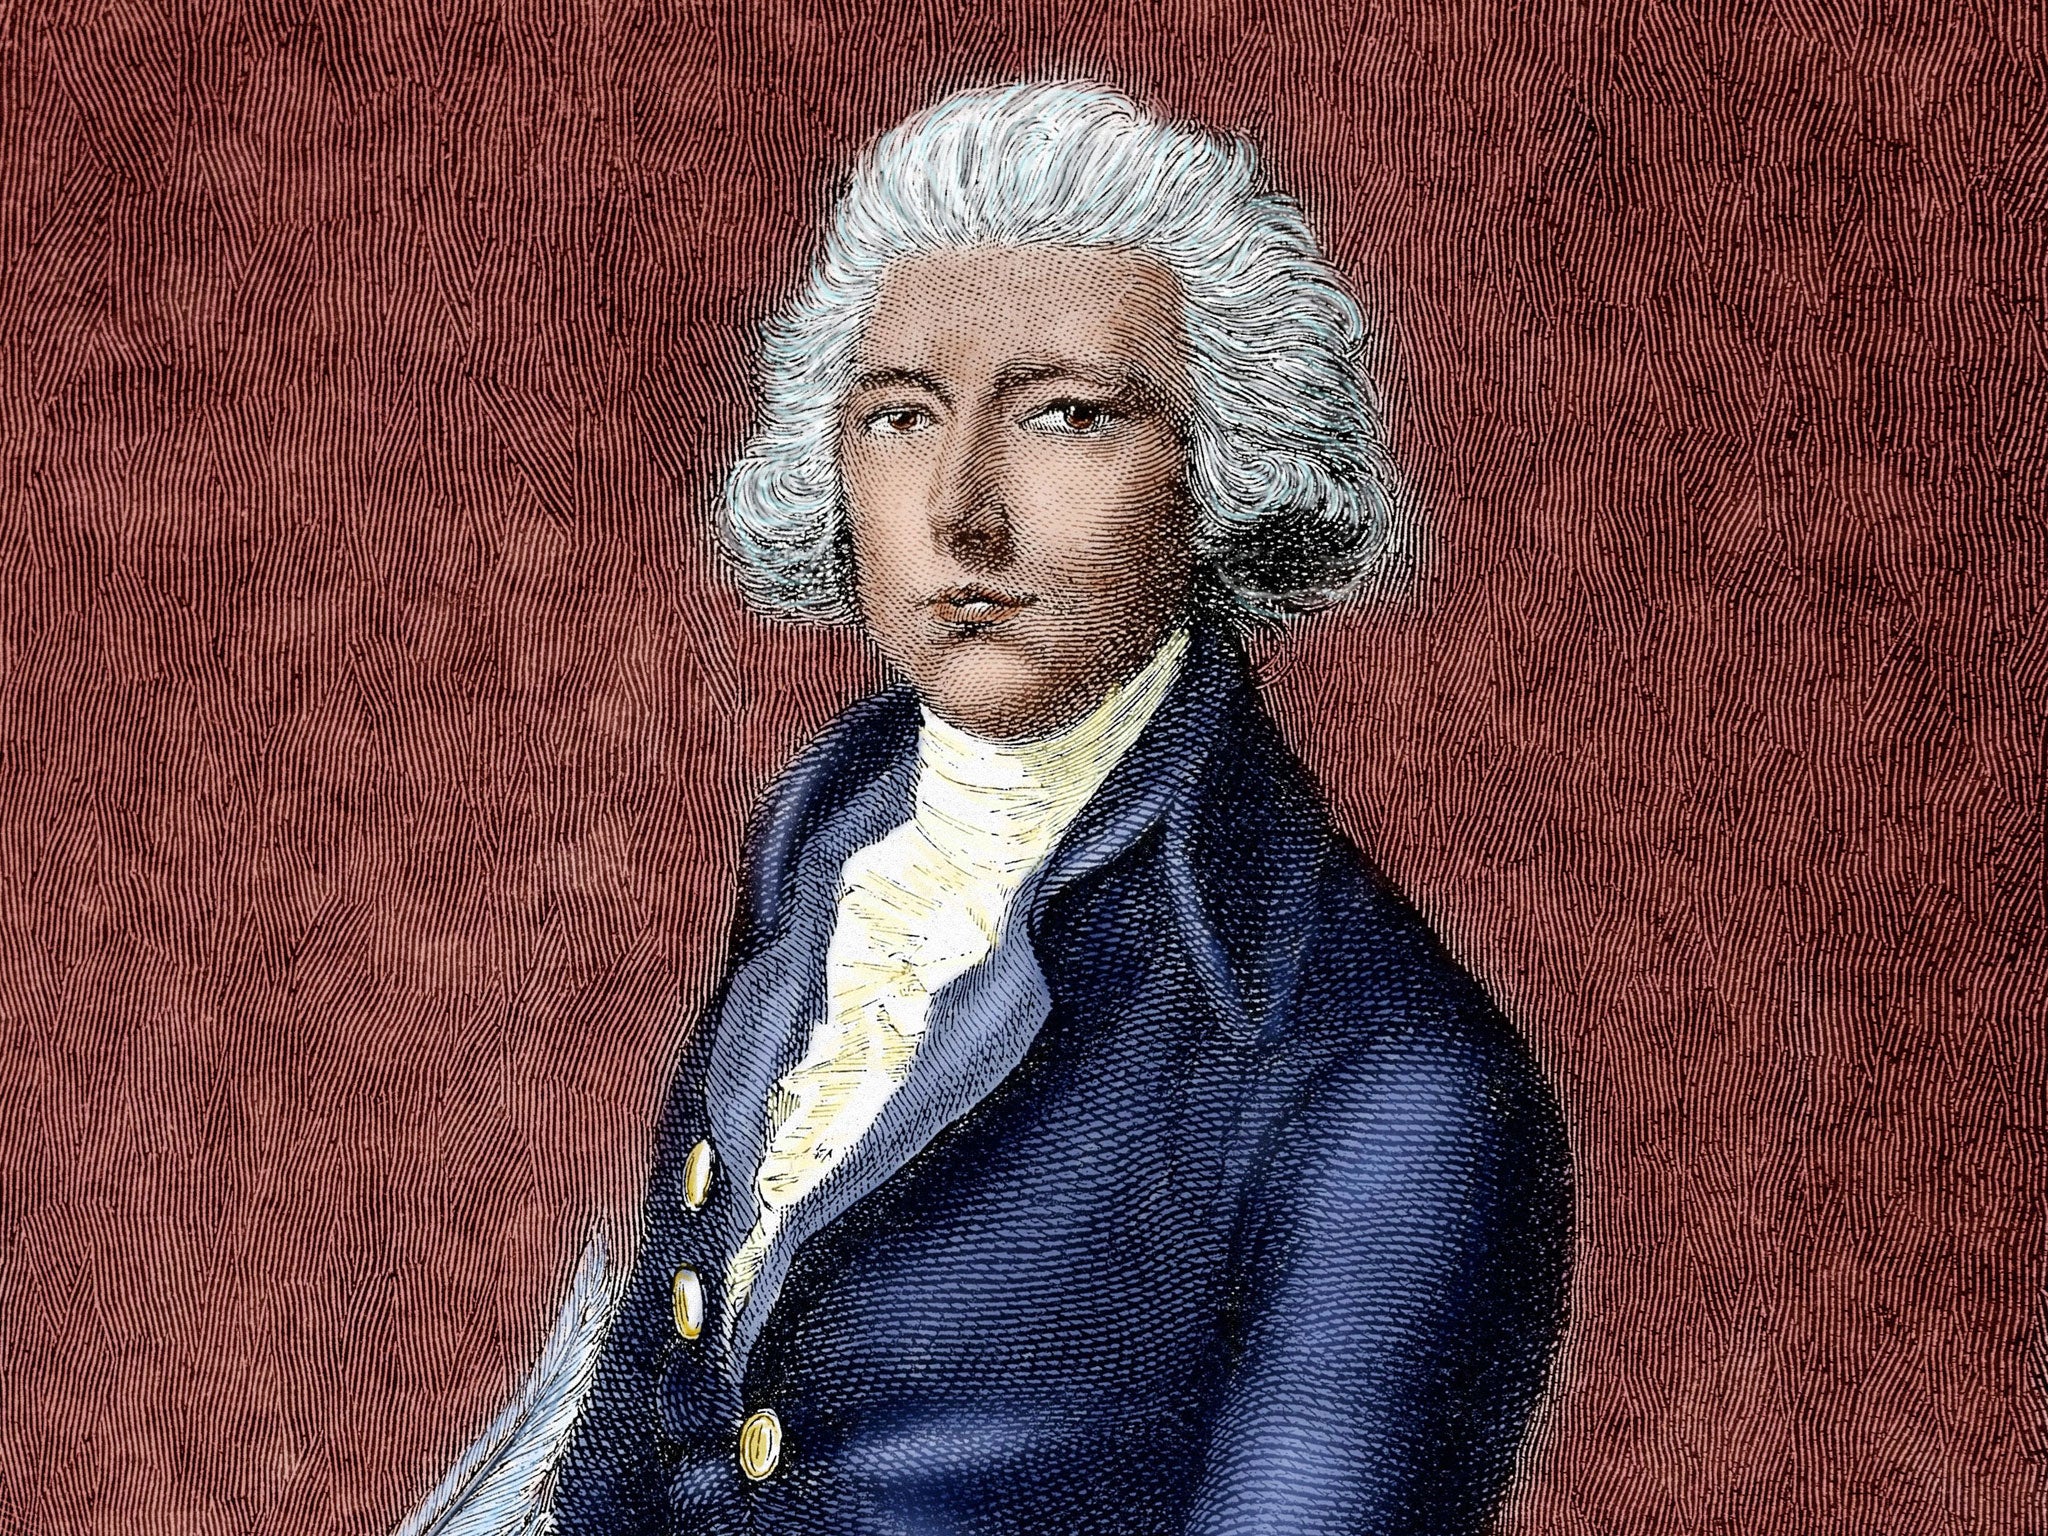 The US city of Pittsburgh was named in honour of William Pitt